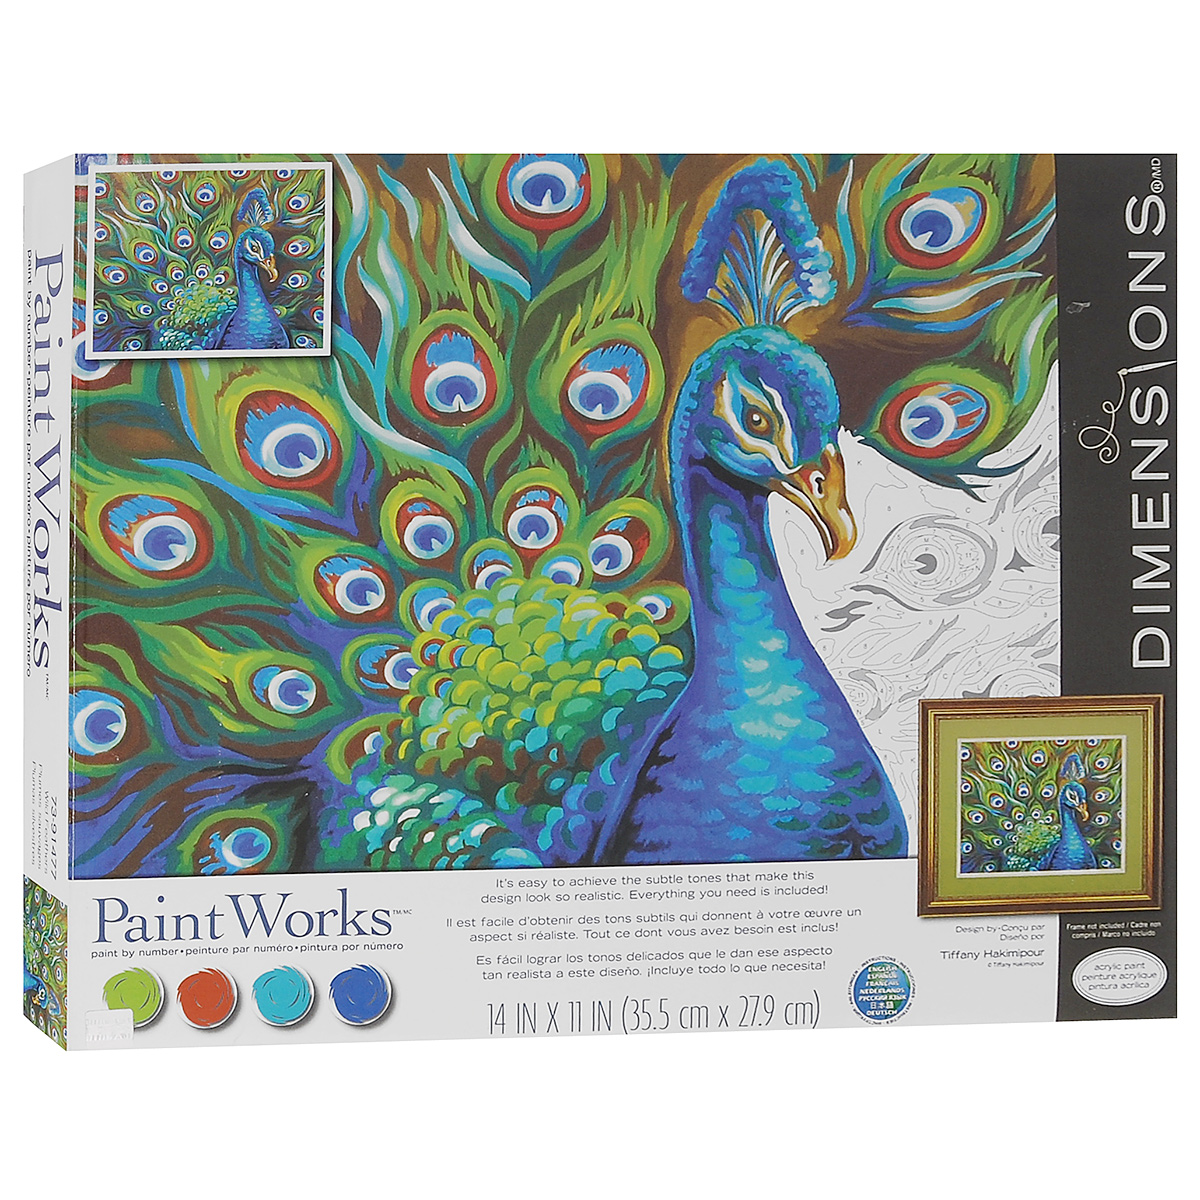    PaintWorks  , 36   28  - PaintWorksDMS-73-91477   PaintWorks         -  ,   .         ,       .        .        ,    .   : -   (12 , 4,73 ), -      , - , -    .  !   ,   ,      ,      .